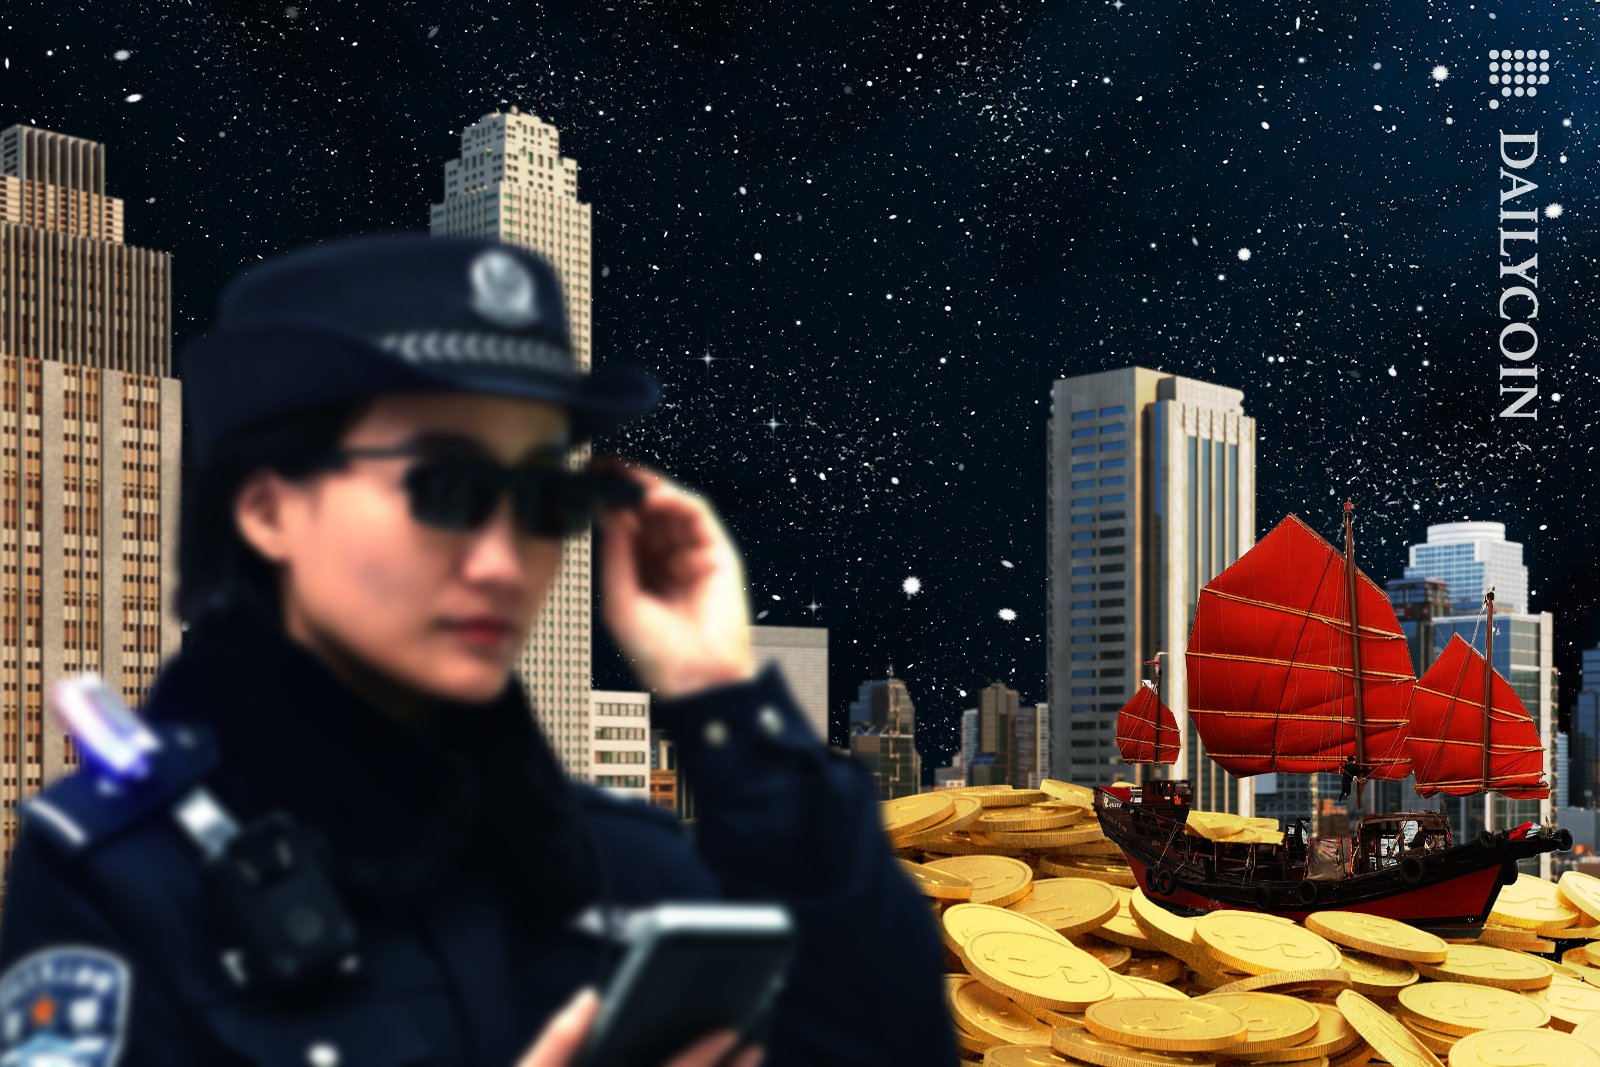 Hong Kong police discovering Victoria Harbour full of unauthorized coins.